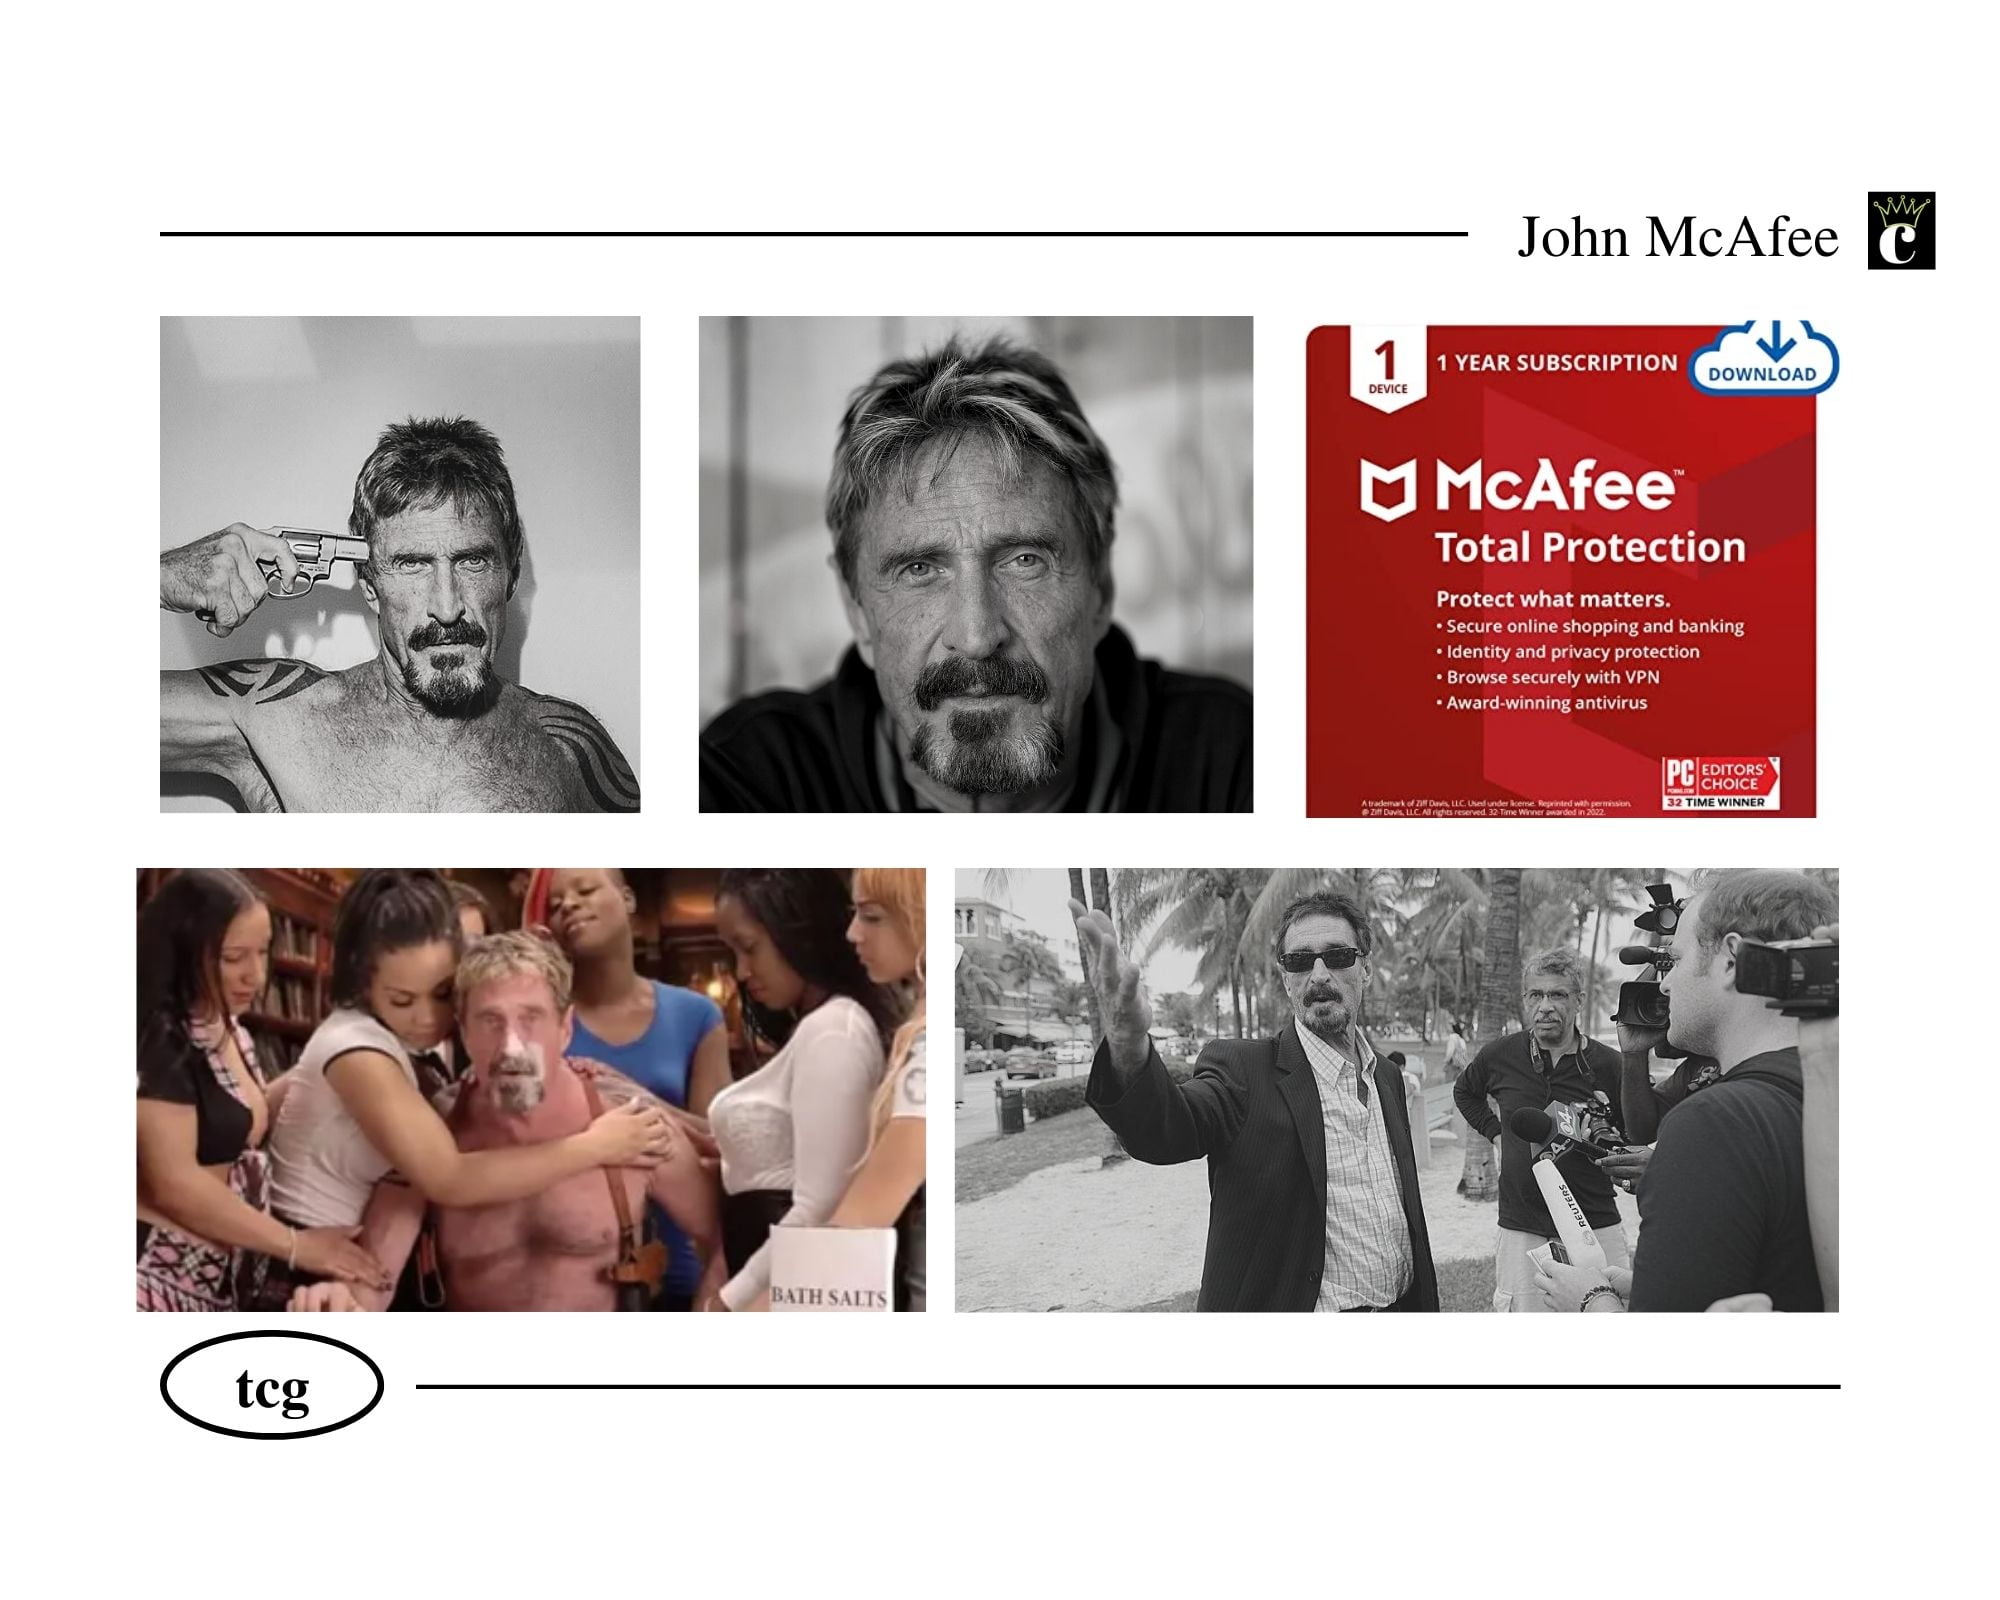 John McAfee Running with the devil